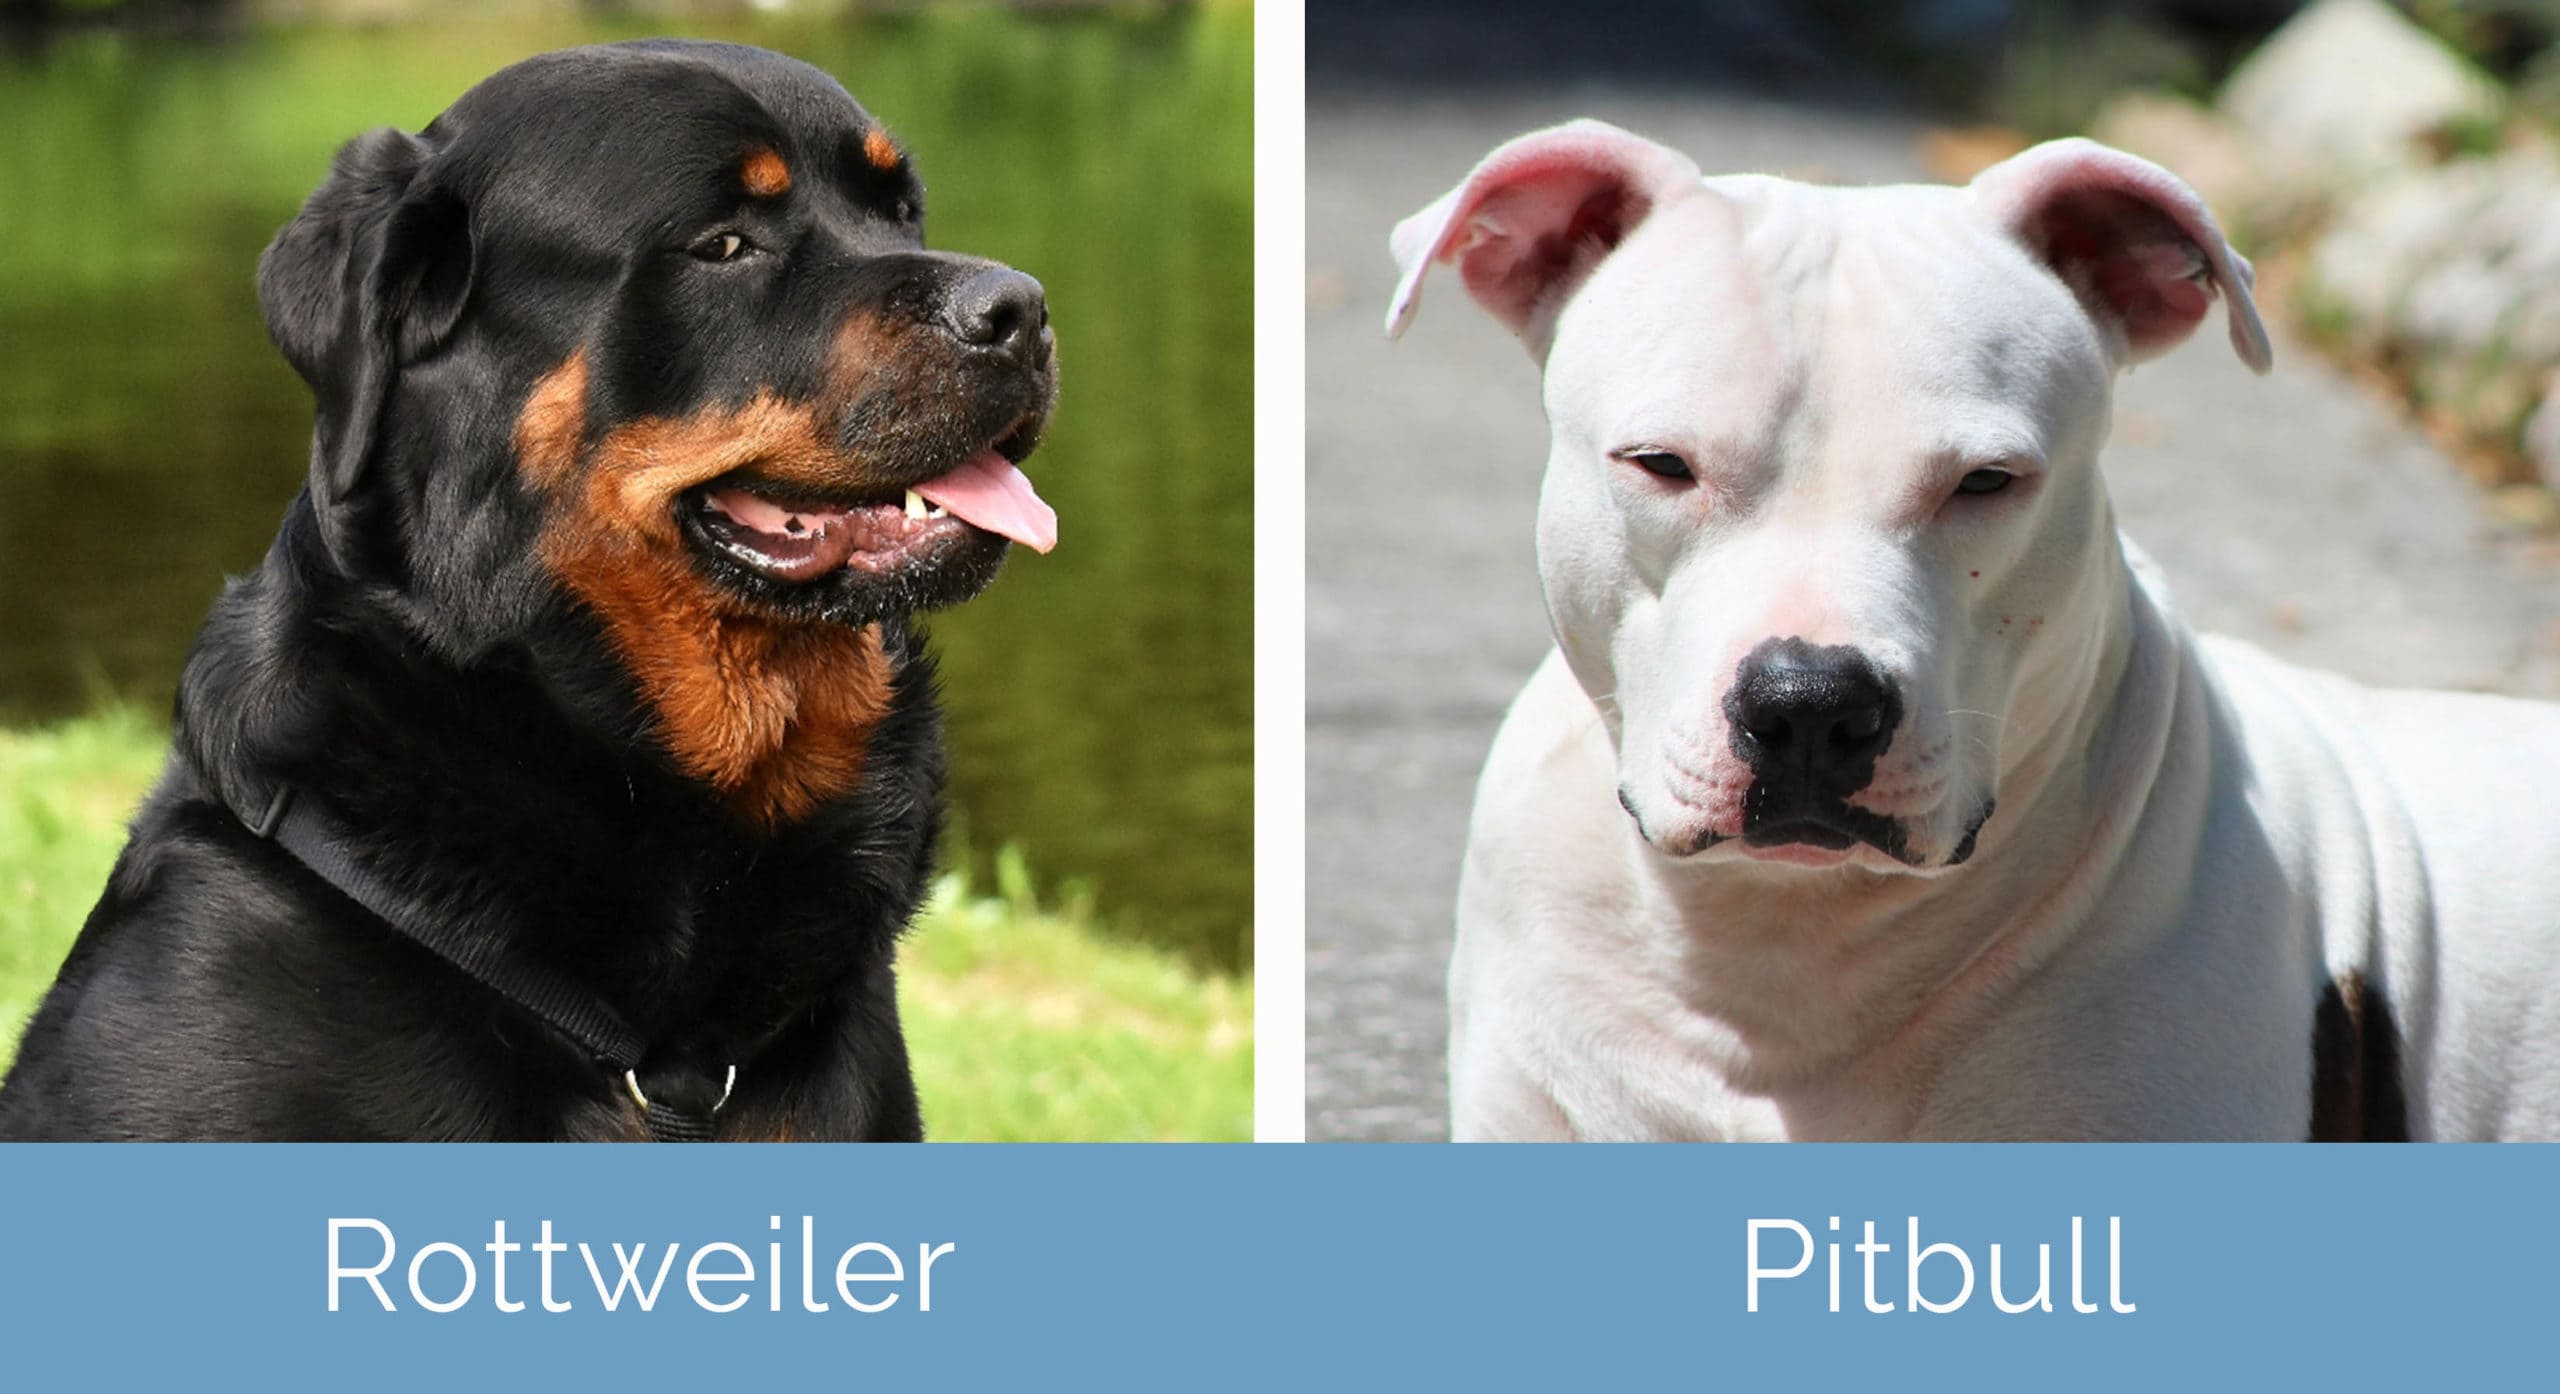 what dog is stronger a rottweiler or pitbull? 2